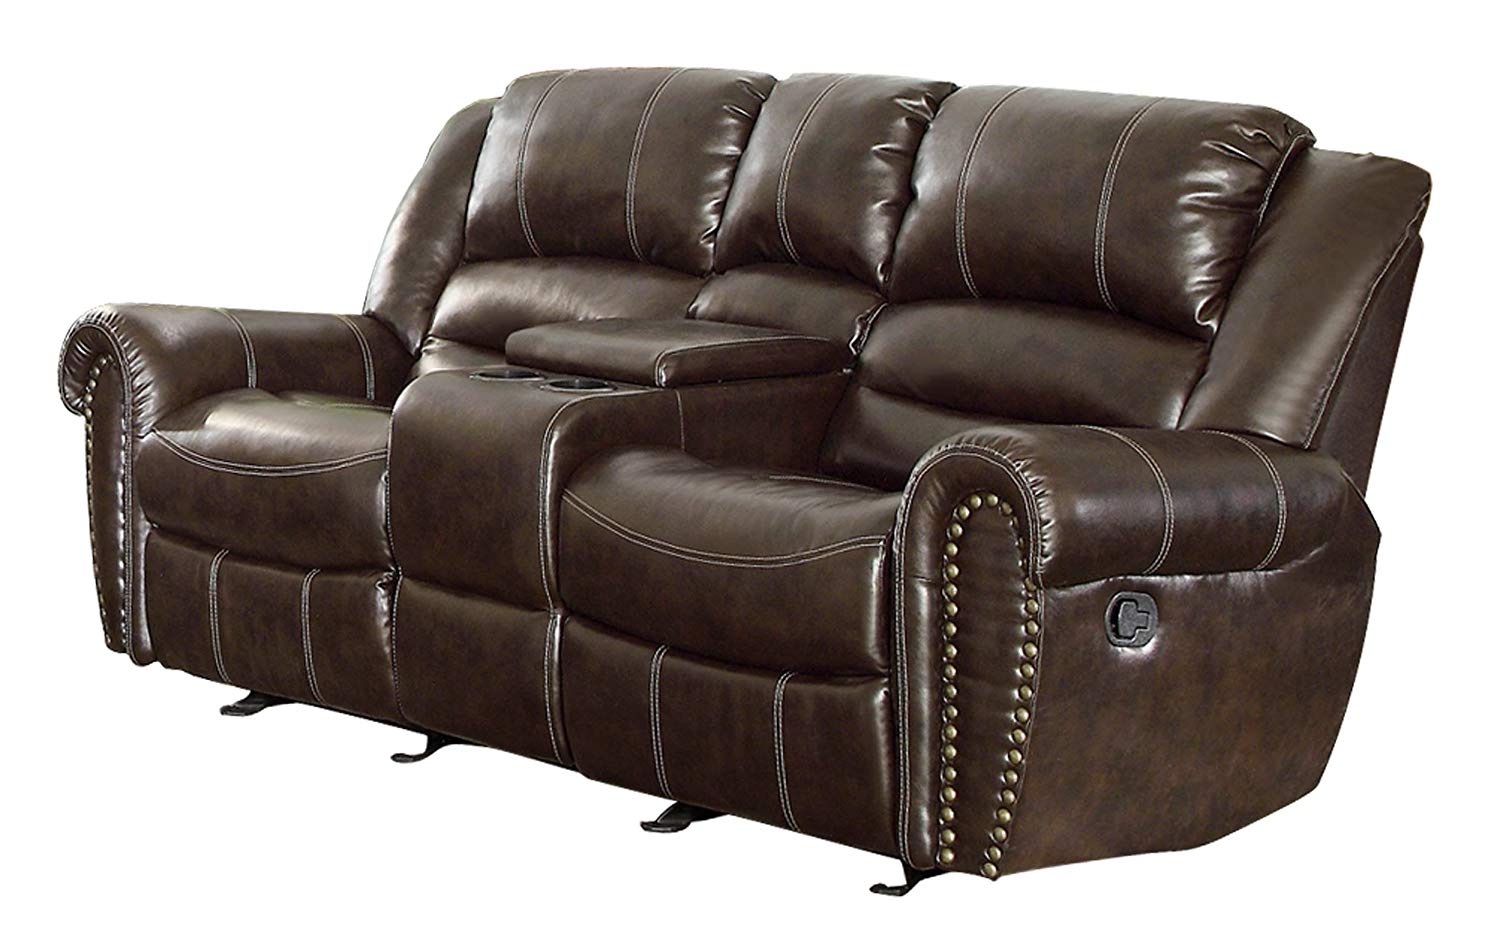 Traveller Location: Homelegance 9668BRW-2 Double Glider Reclining Loveseat with  Center Console Bonded Leather, Brown: Kitchen & Dining